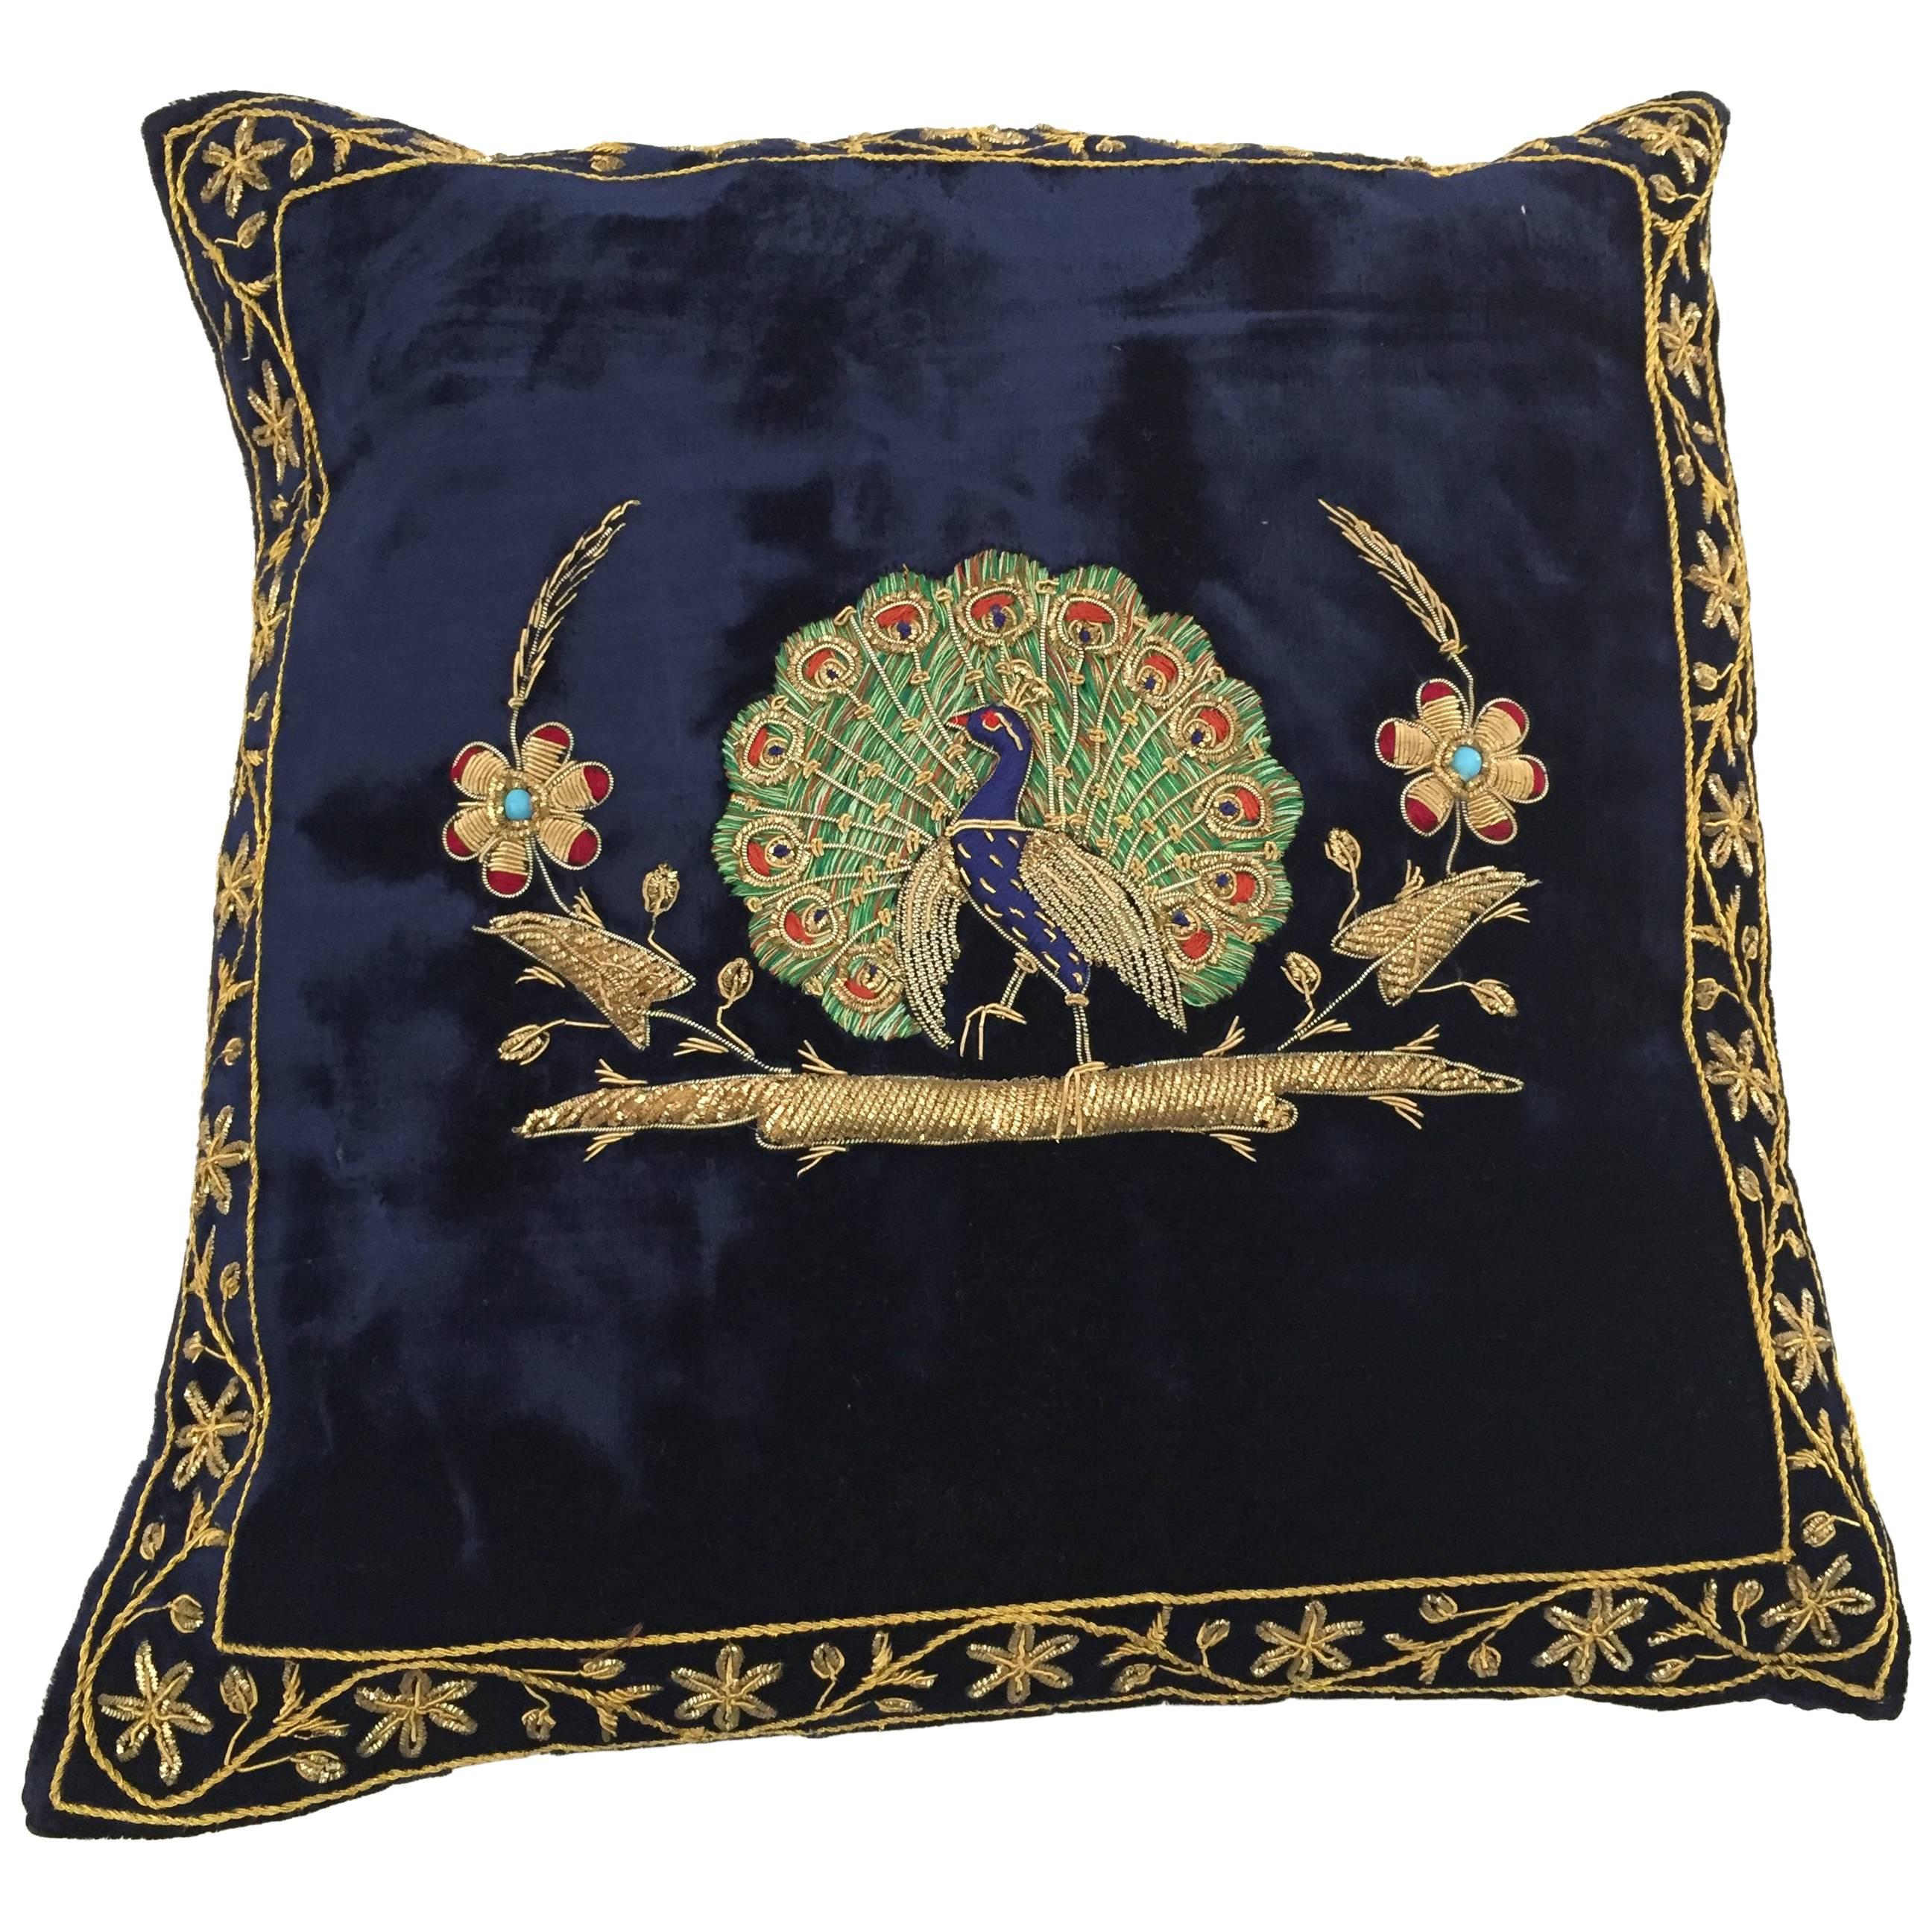 Velvet Blue Silk Pillow Embroidered with Gold Peacock